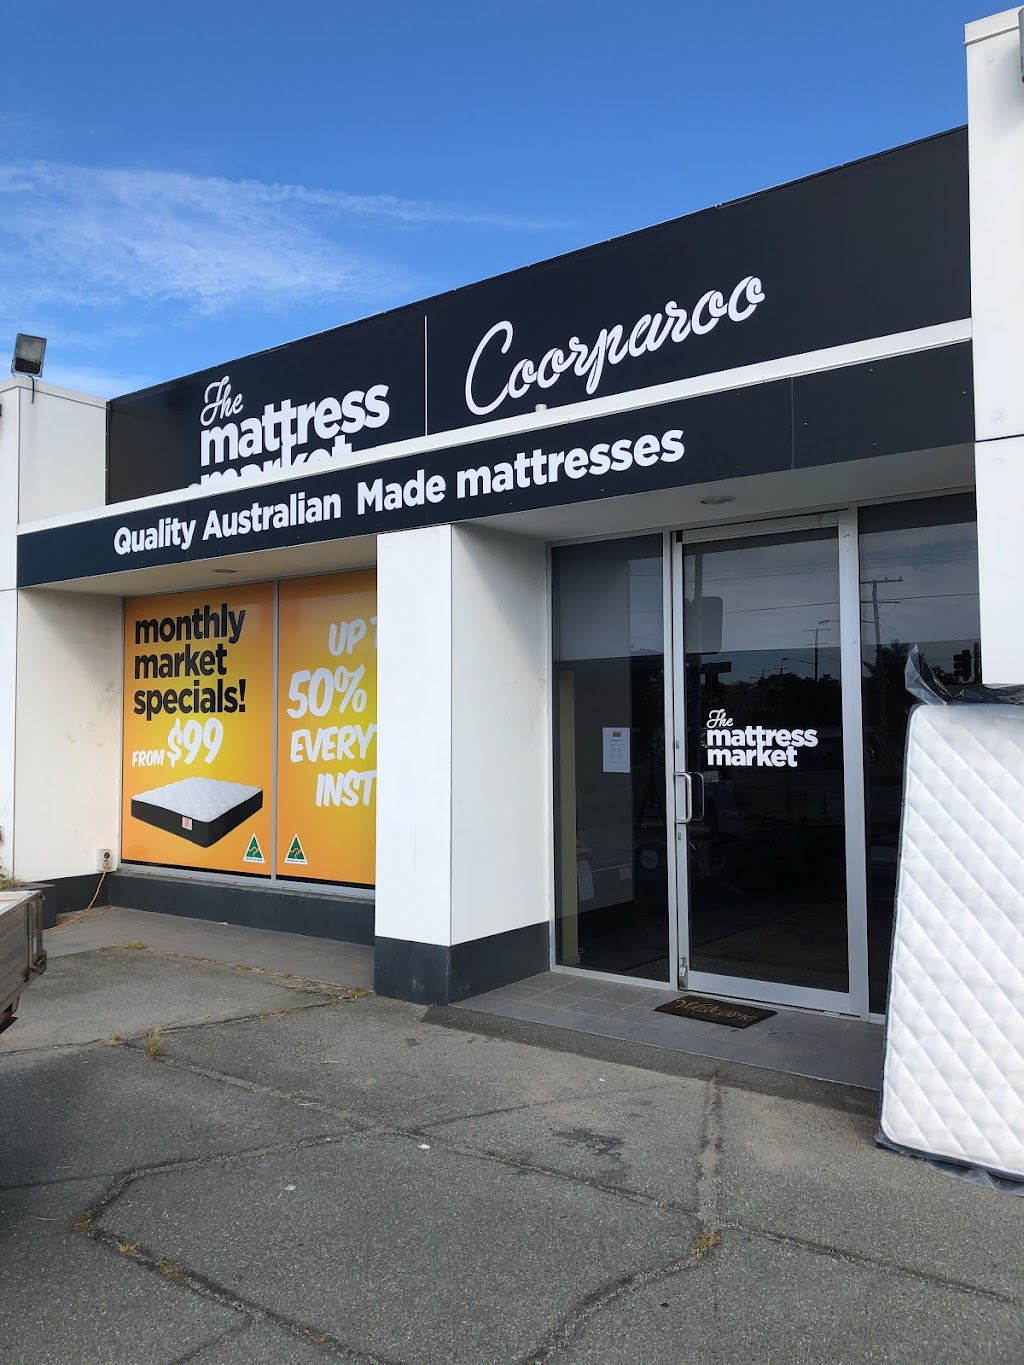 Beds R Us - Coorparoo | 429 Old Cleveland Rd, Coorparoo QLD 4151, Australia | Phone: 0455 661 721